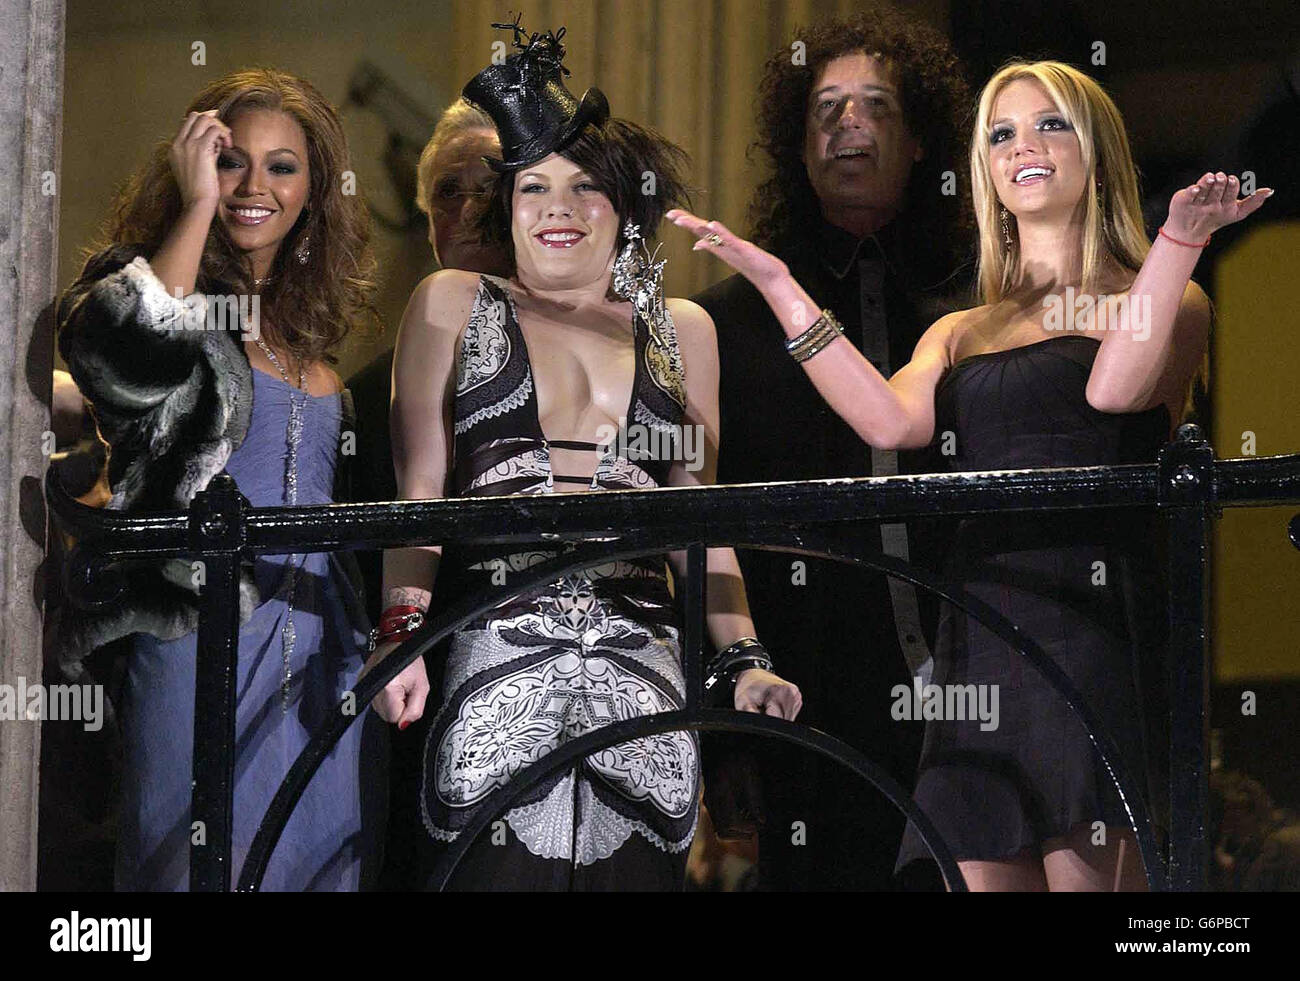 From left to right) singers Beyonce Knowles, Pink, and Britney Spears  during the Pepsi Gladiator TV Commercial global premiere at the National  Gallery in Trafalgar Square, central London. Behind them are Queen